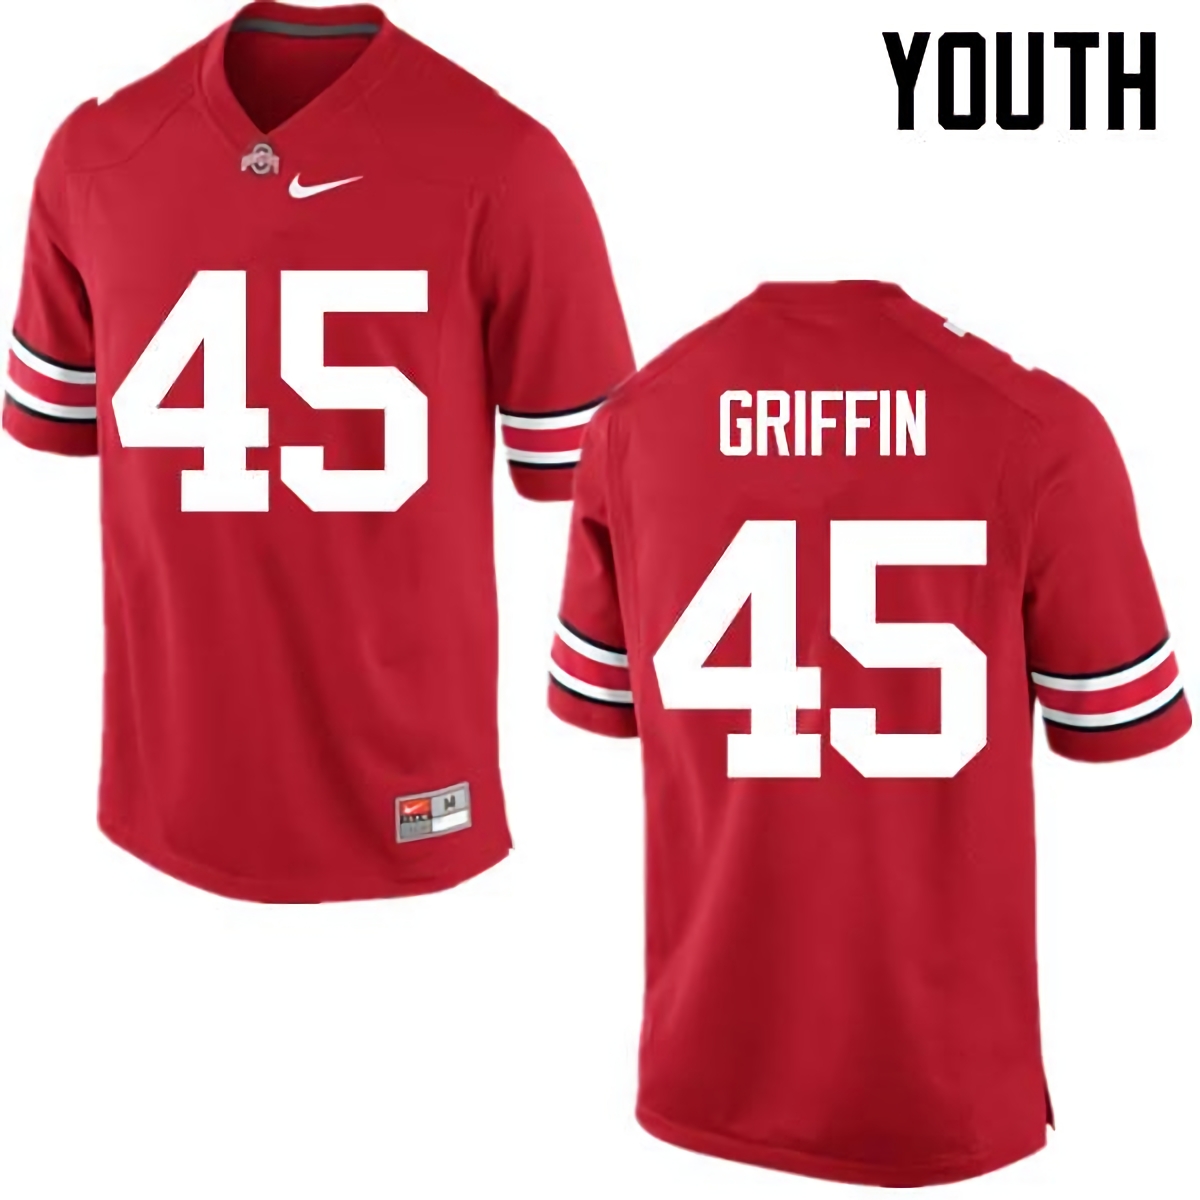 Archie Griffin Ohio State Buckeyes Youth NCAA #45 Nike Red College Stitched Football Jersey BCH8256AM